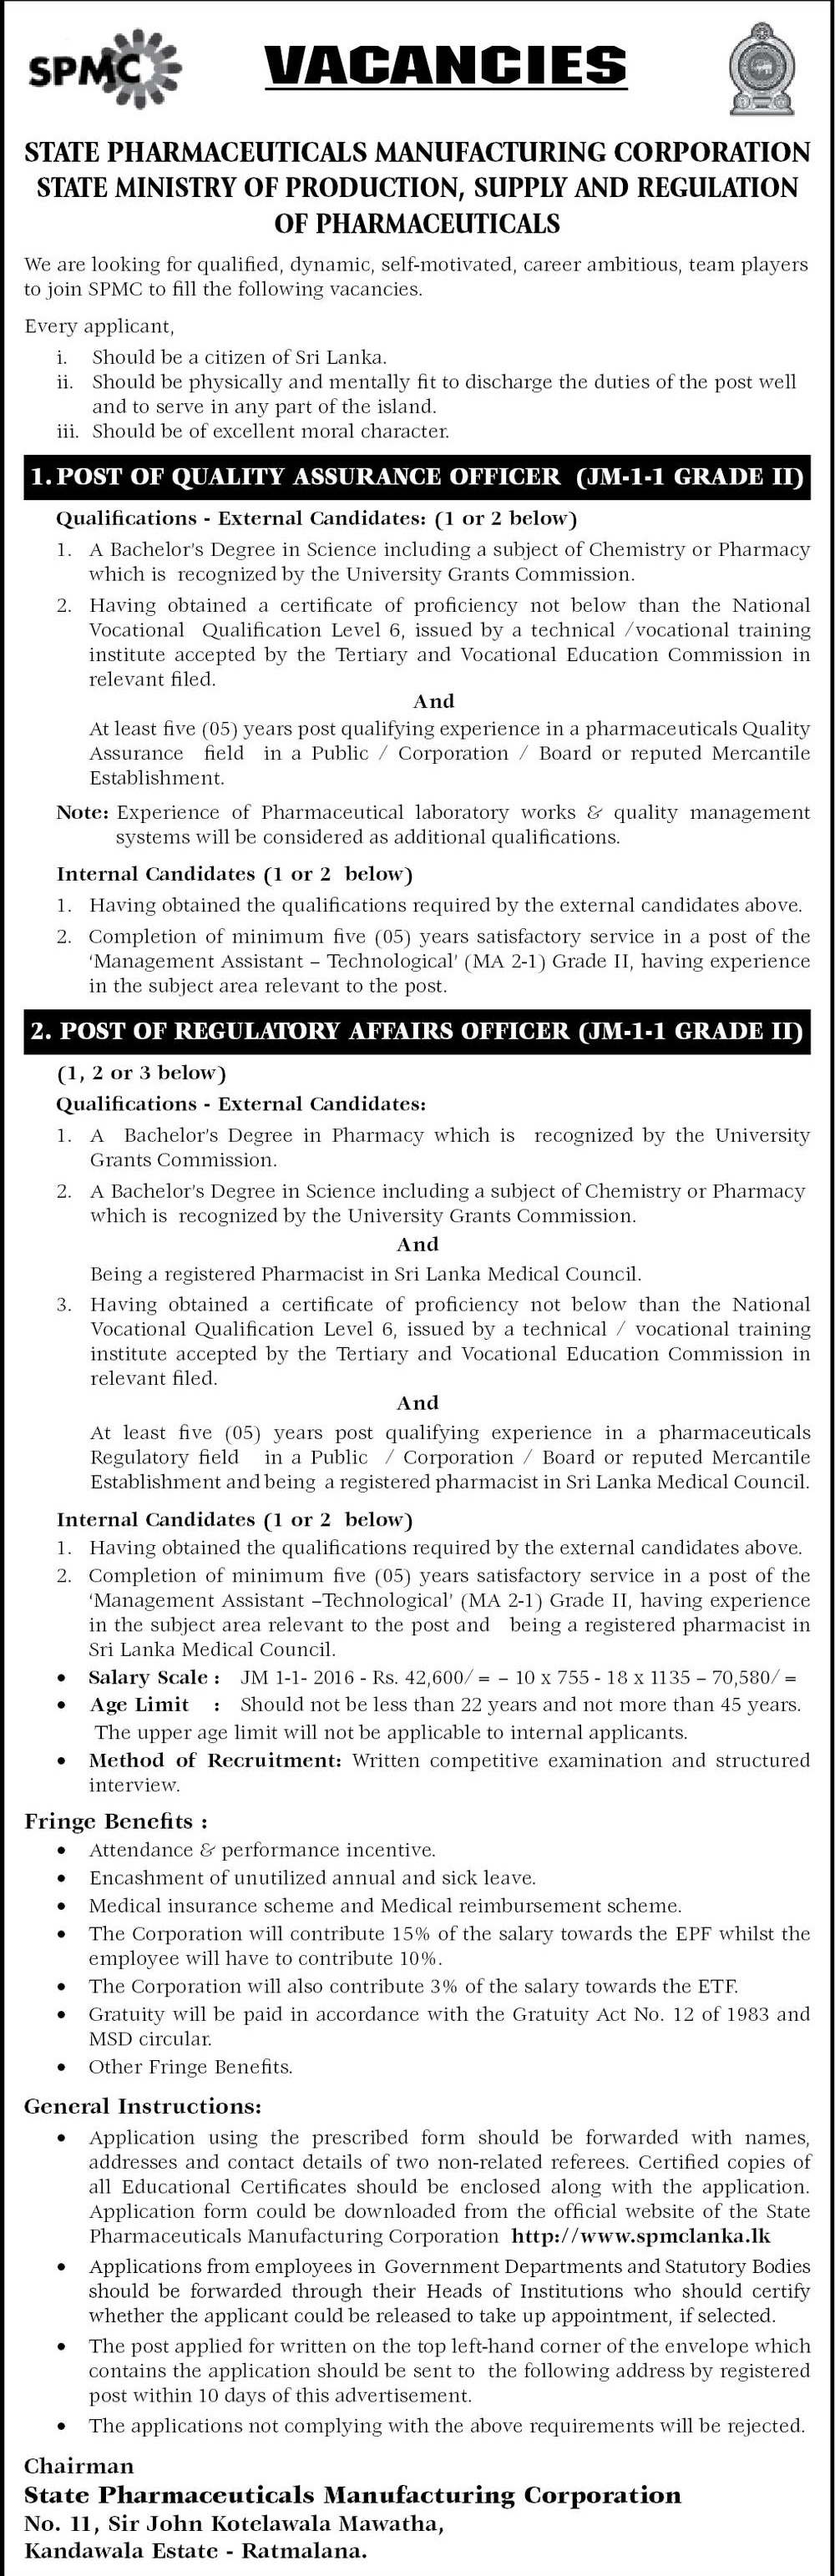 Vacancies in State Pharmaceuticals Manufacturing Corporation 2022 English